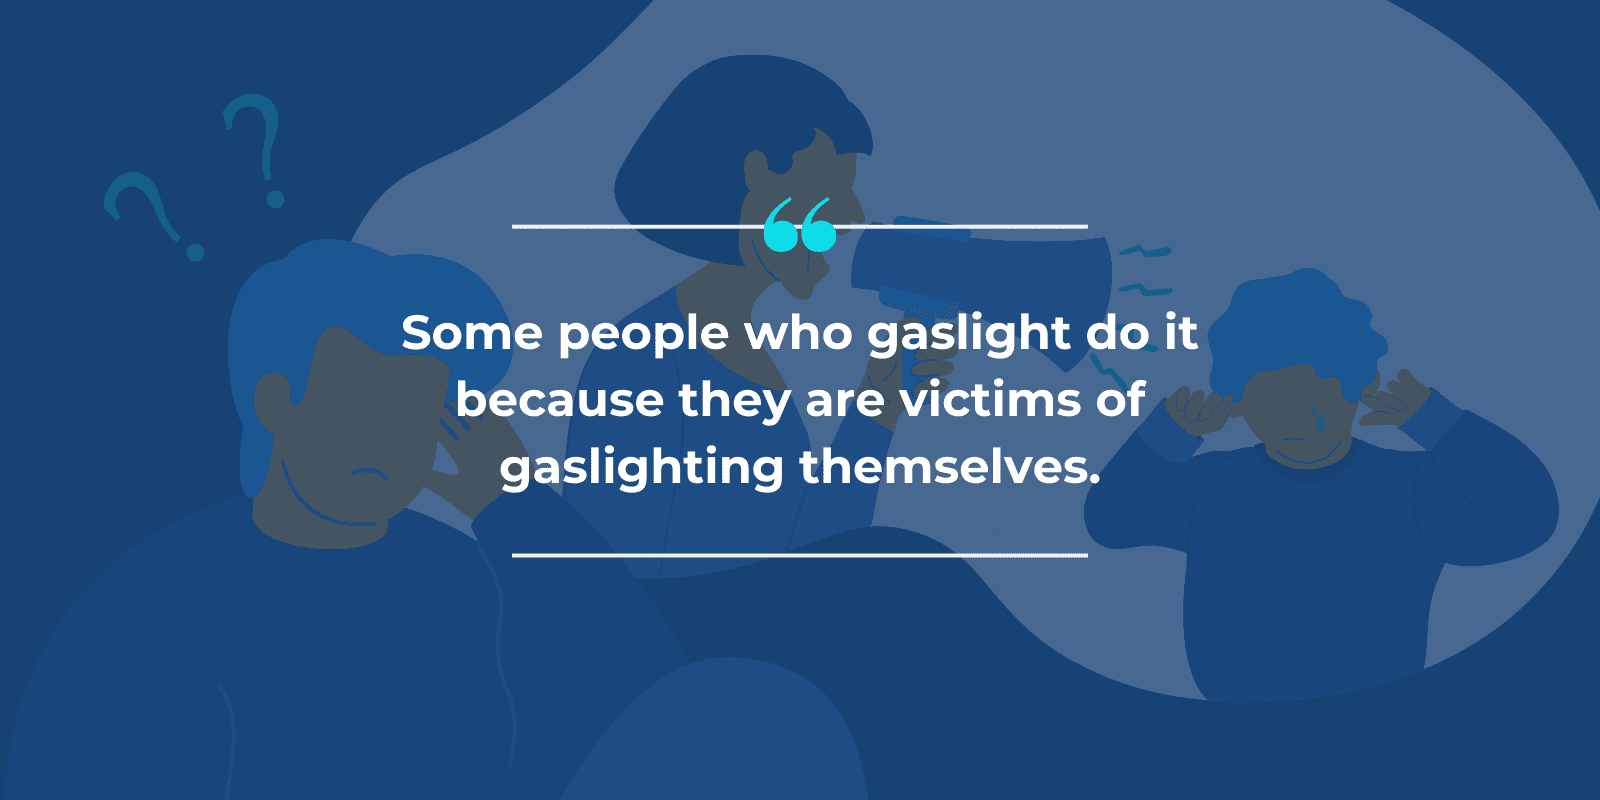 "Some people who gaslight do it because they are victims of gaslighting themselves." Written above a transparent illustration of a man thinking about his childhood experience of being gaslighted by his mom